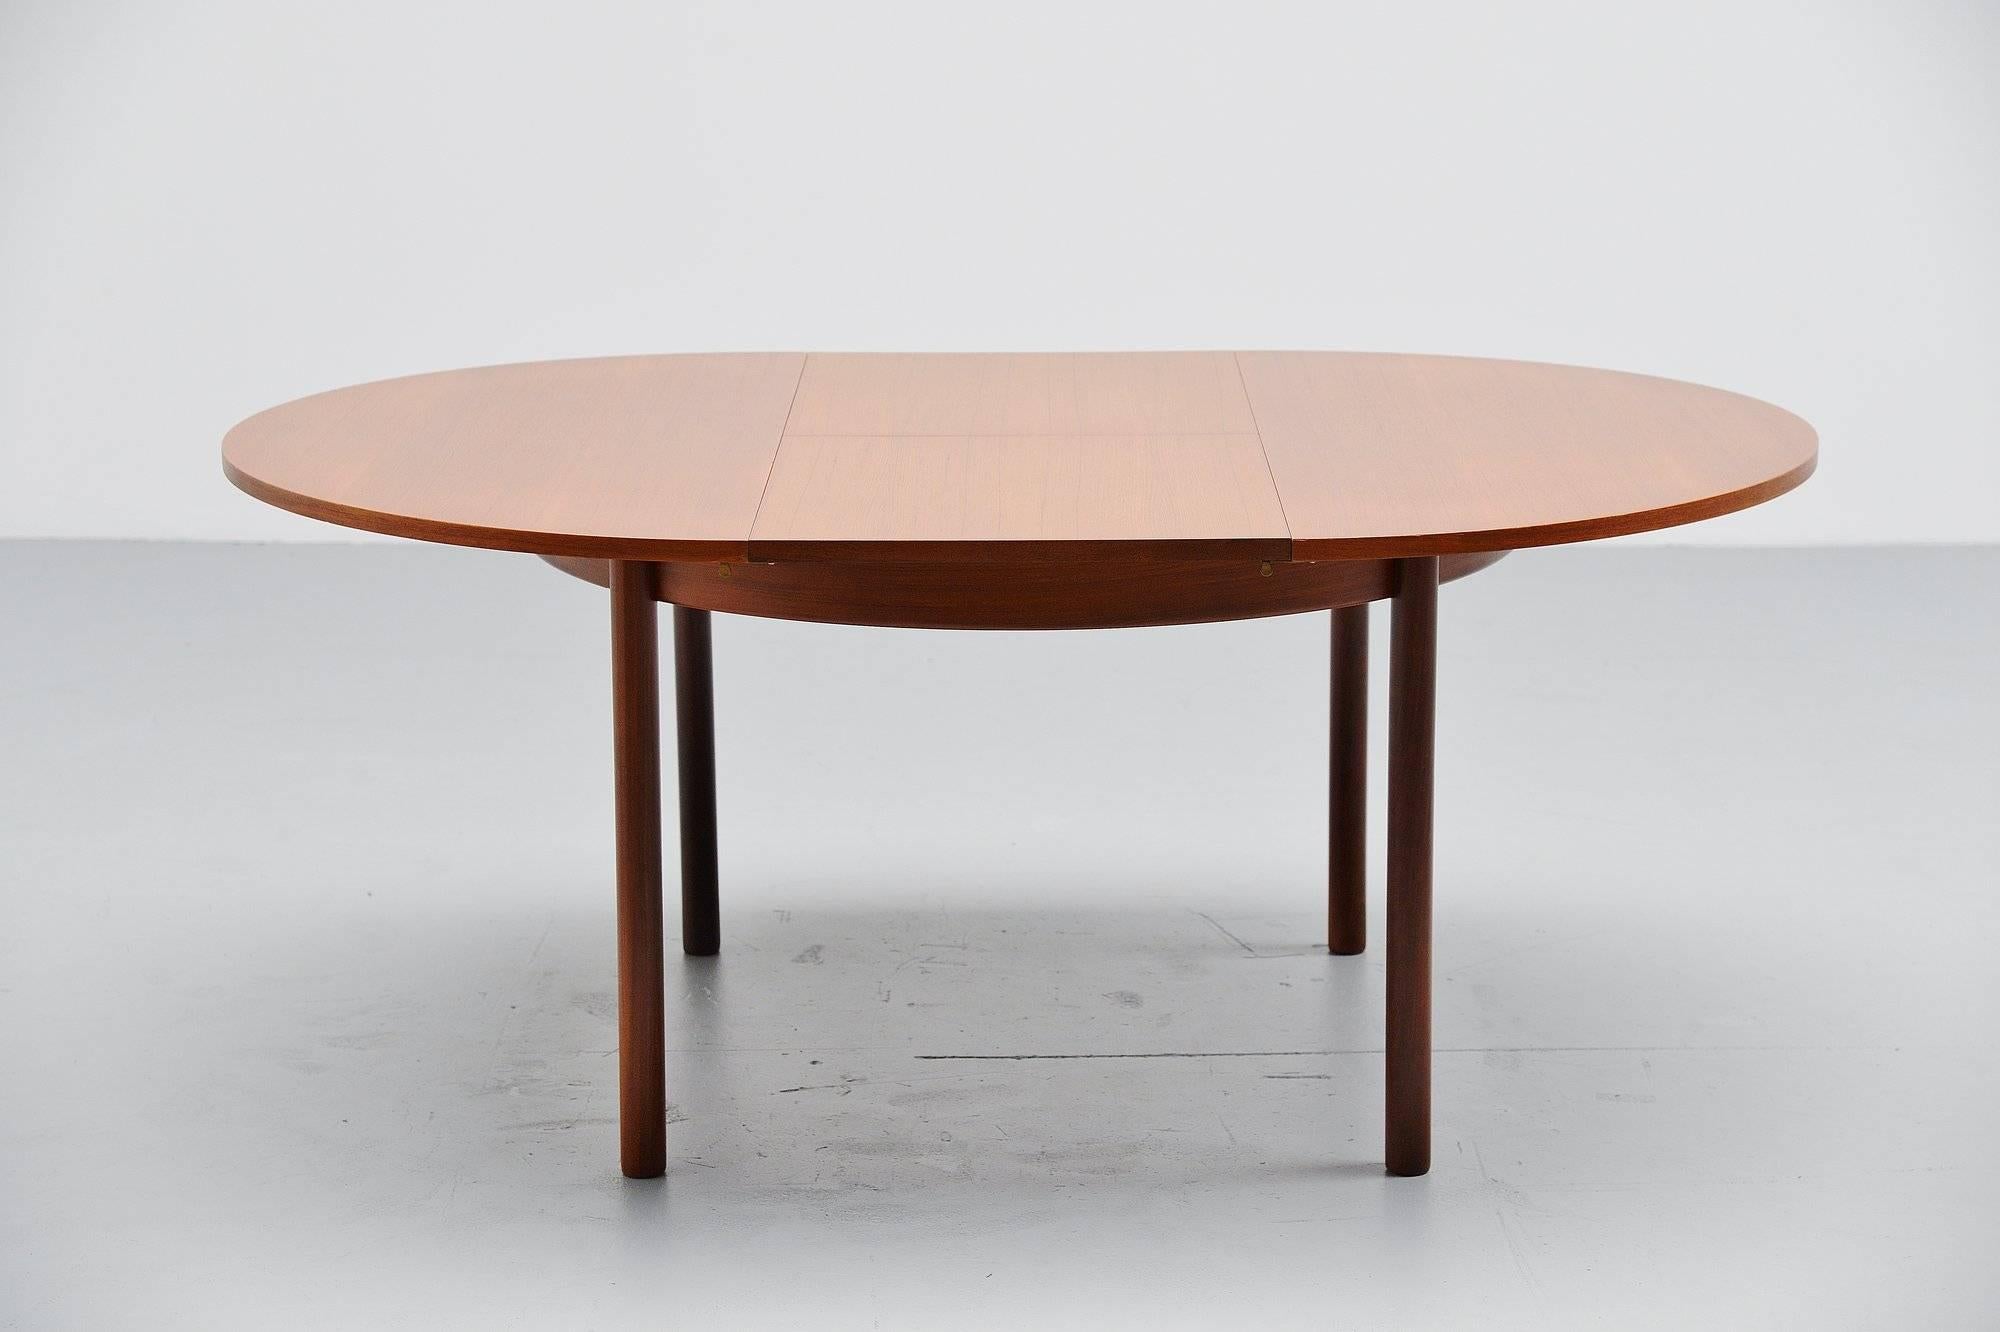 Nice teak wooden dining table made by unknown designed or manufacturer, Denmark 1960. This table is in the manner of Borge Mogensen for sure but we couldn't find any information about this table. It is made of high quality teak wood and has a nice